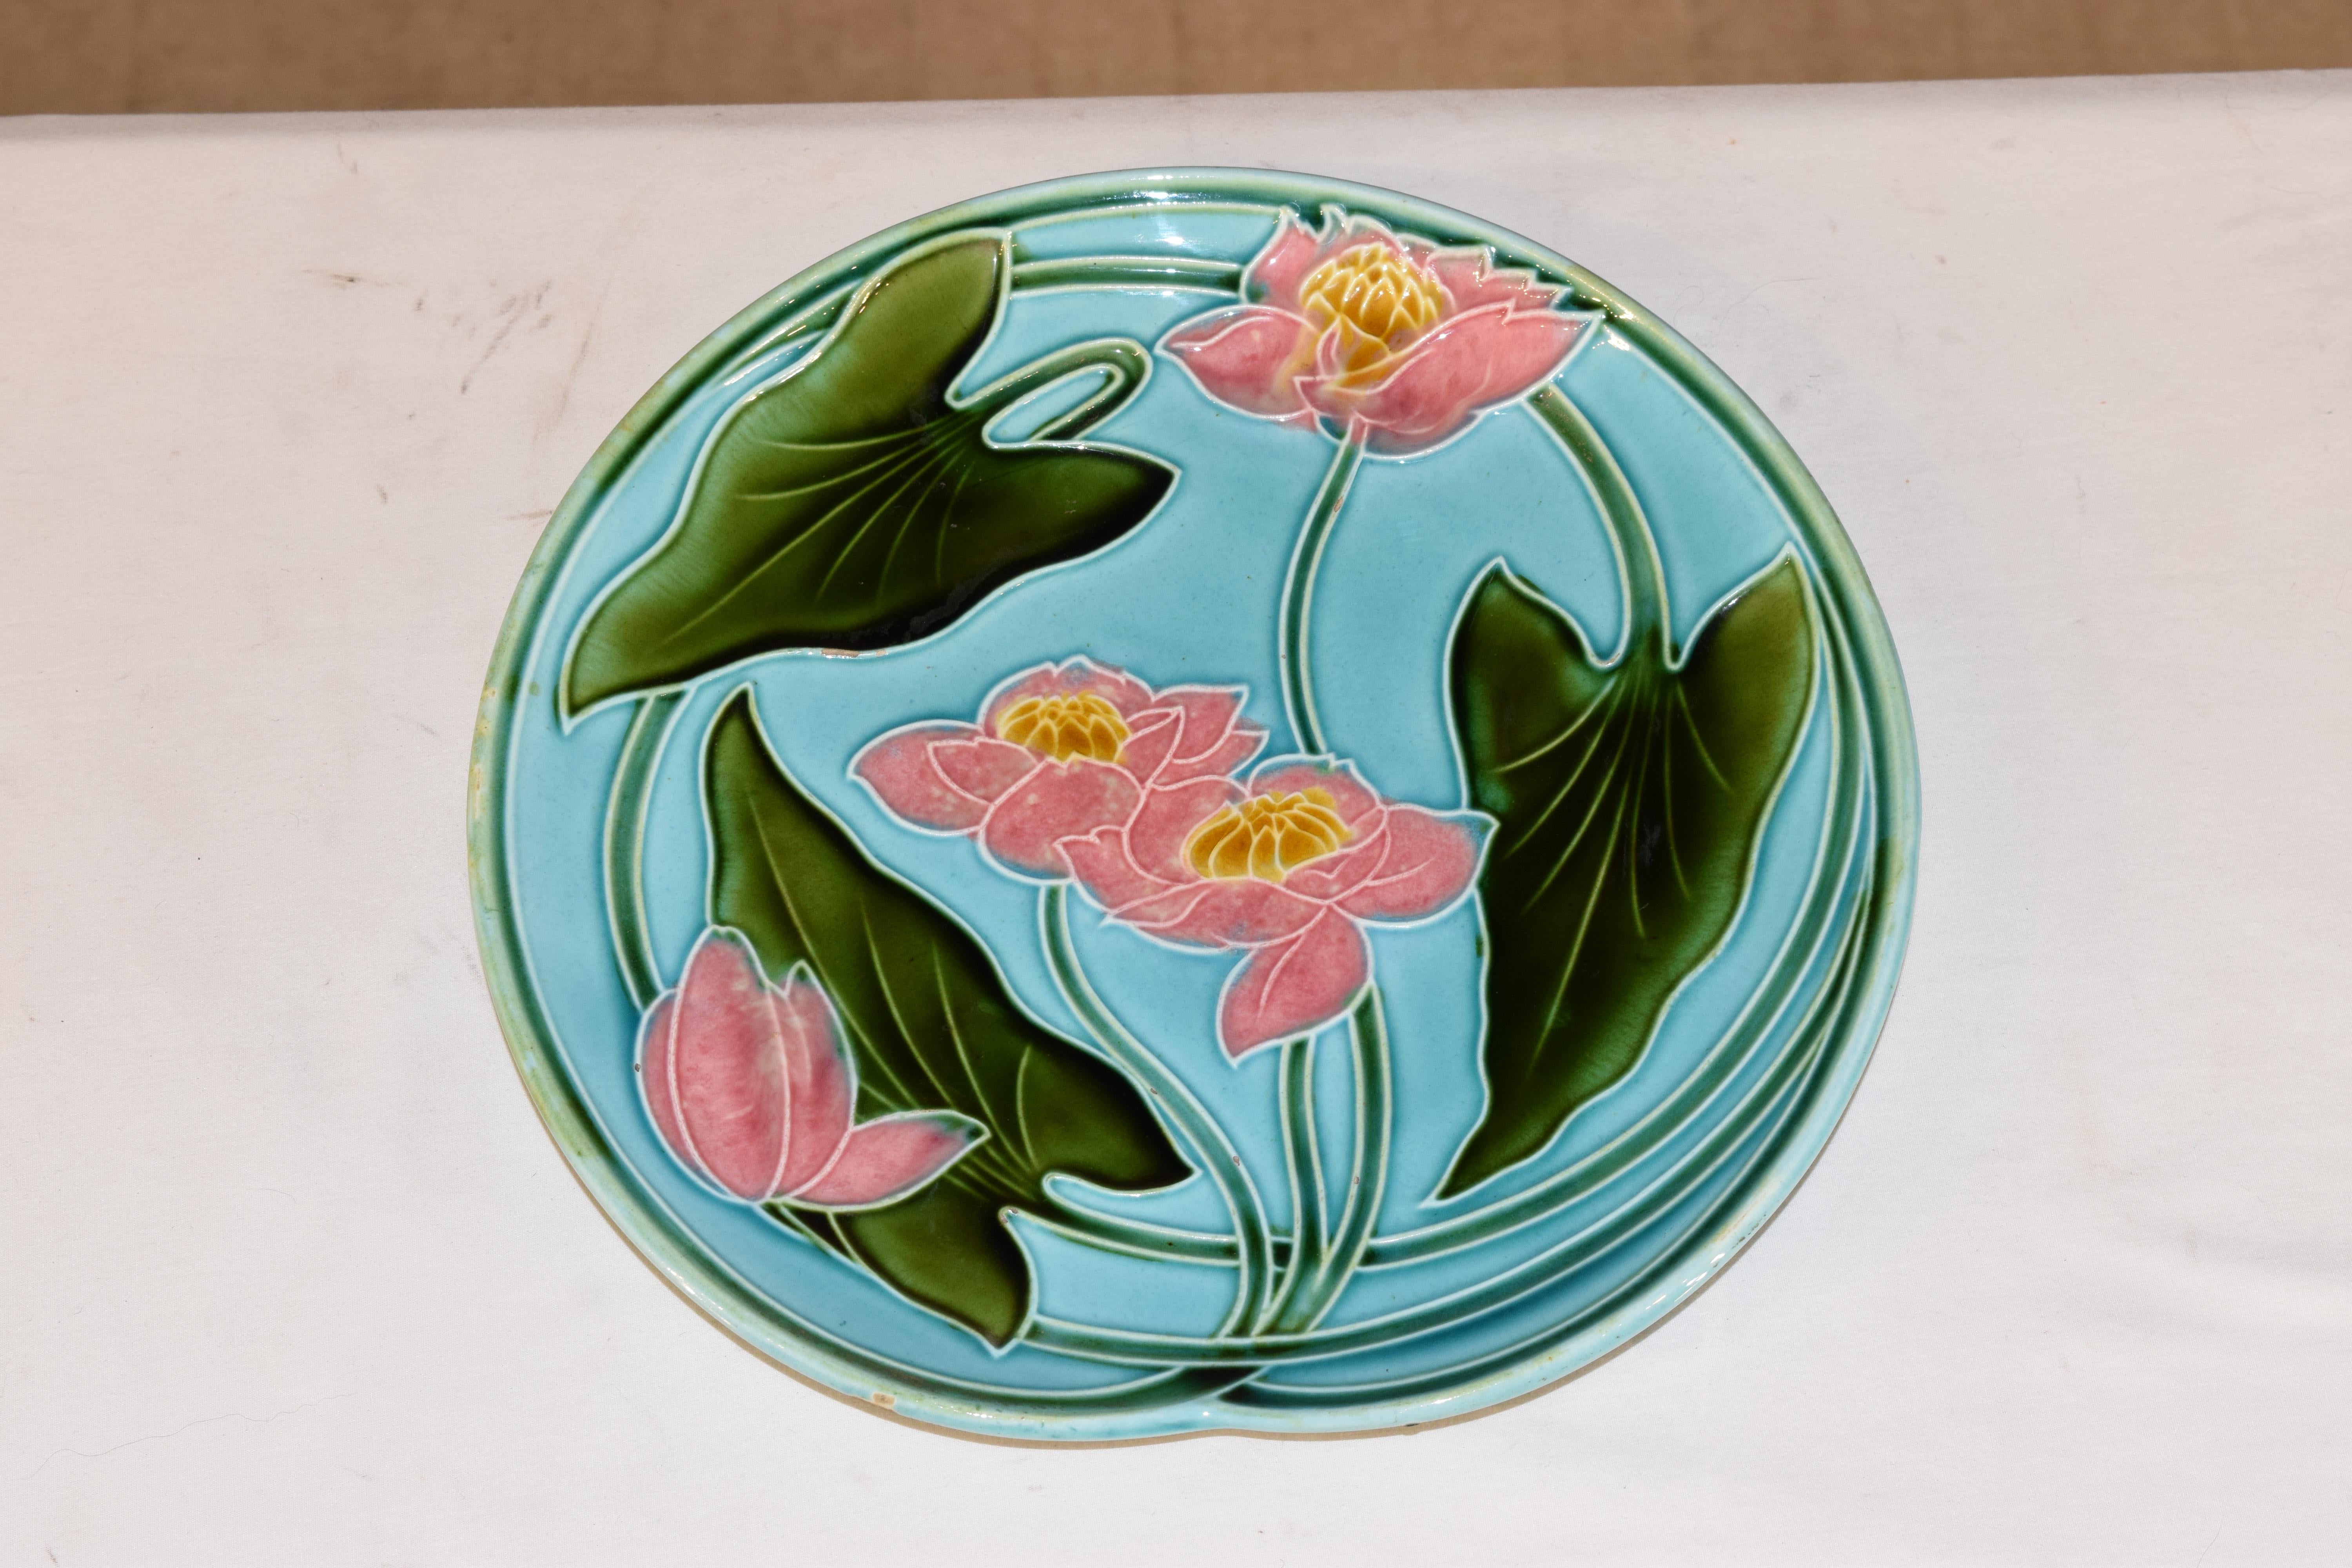 German Late 19th Century Villeroy & Boch Majolica Charger